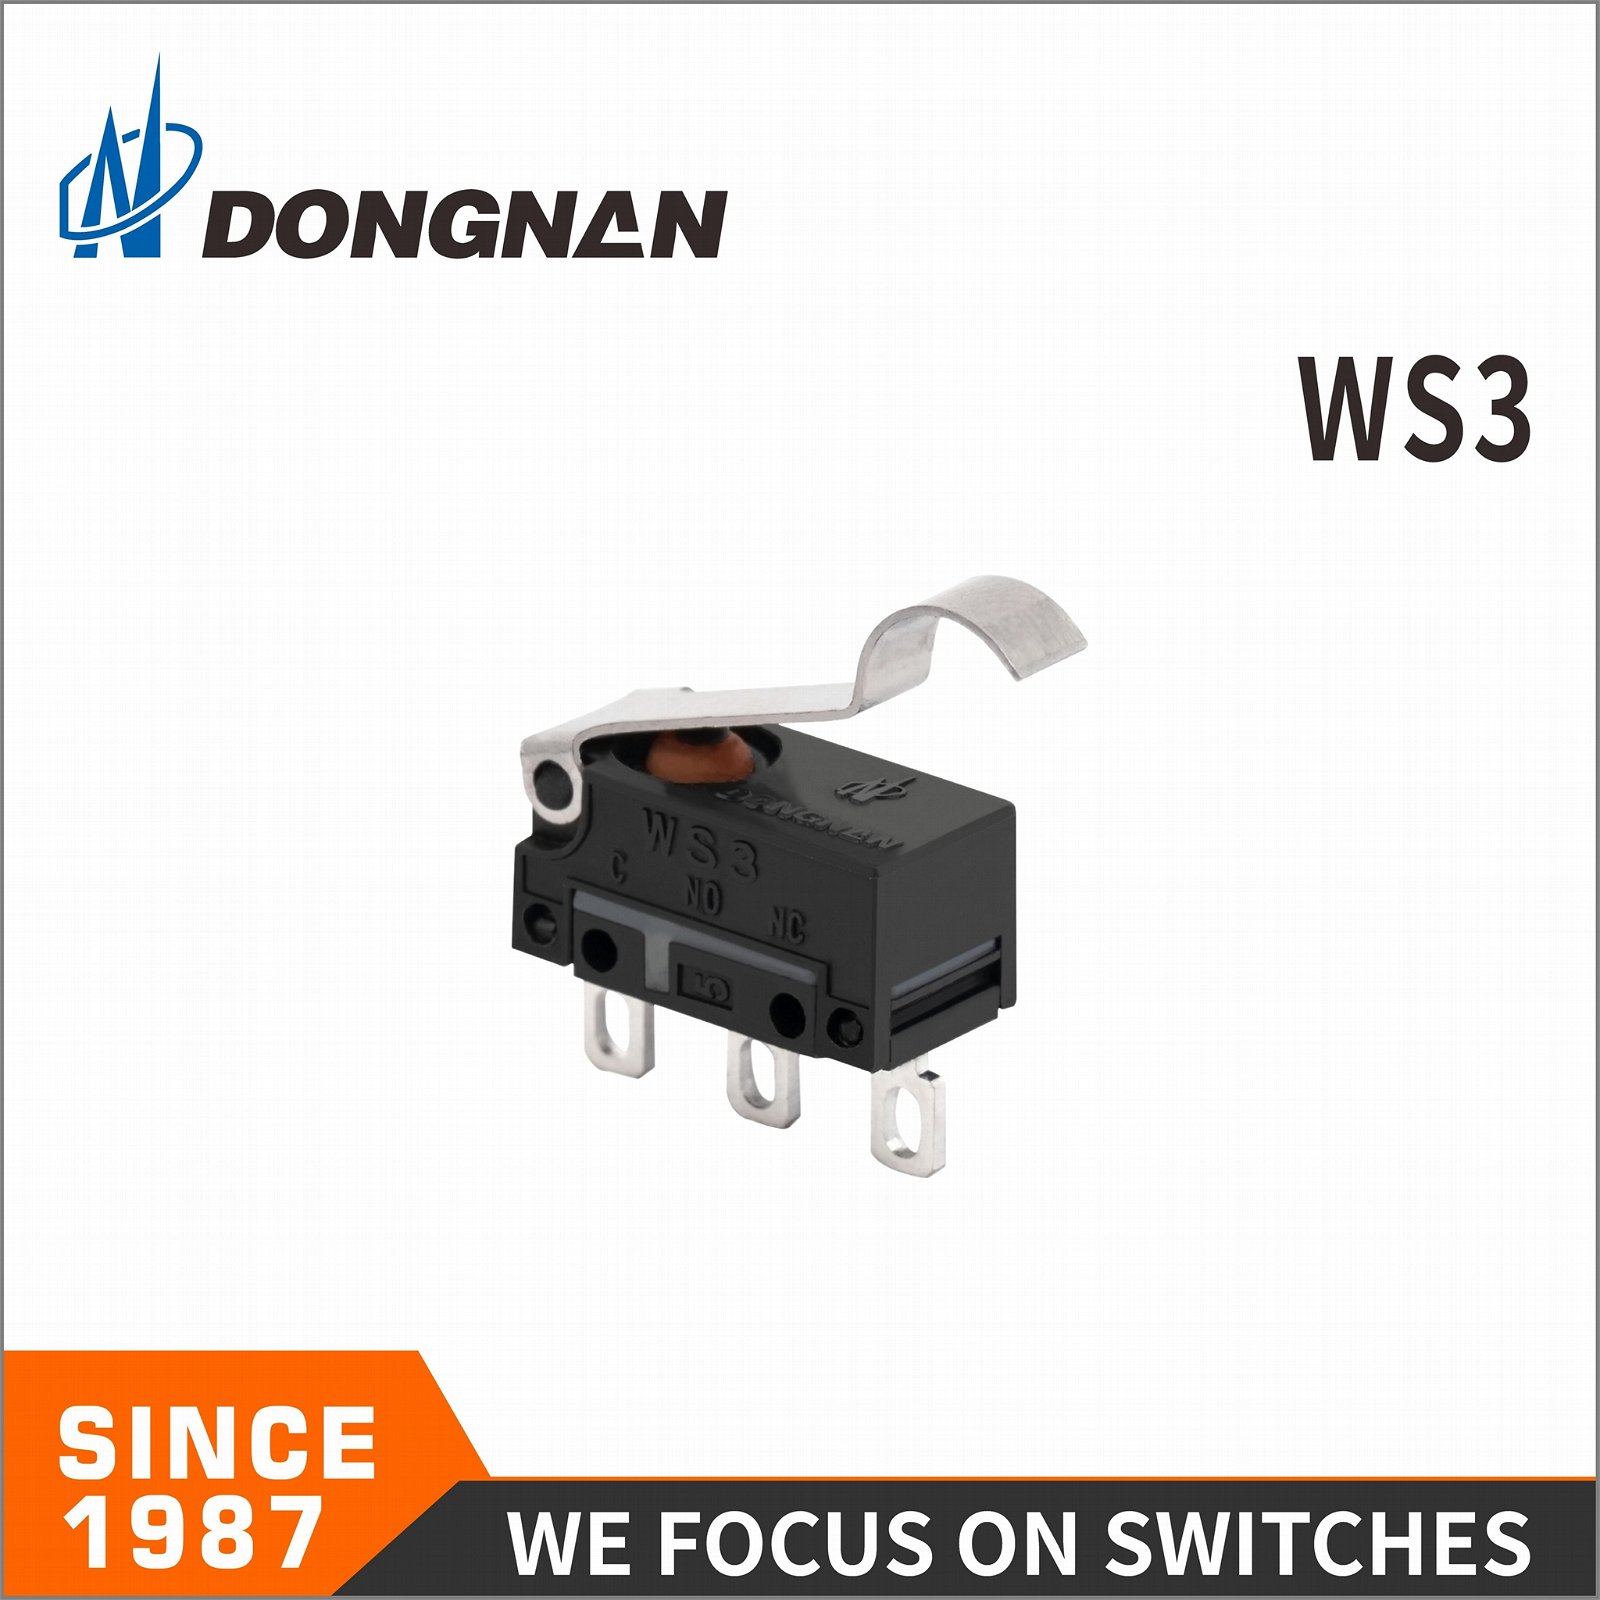 Dongnan Gas Range Ws3 Waterproof and Dustproof Micros Witch Withstand Voltage 4